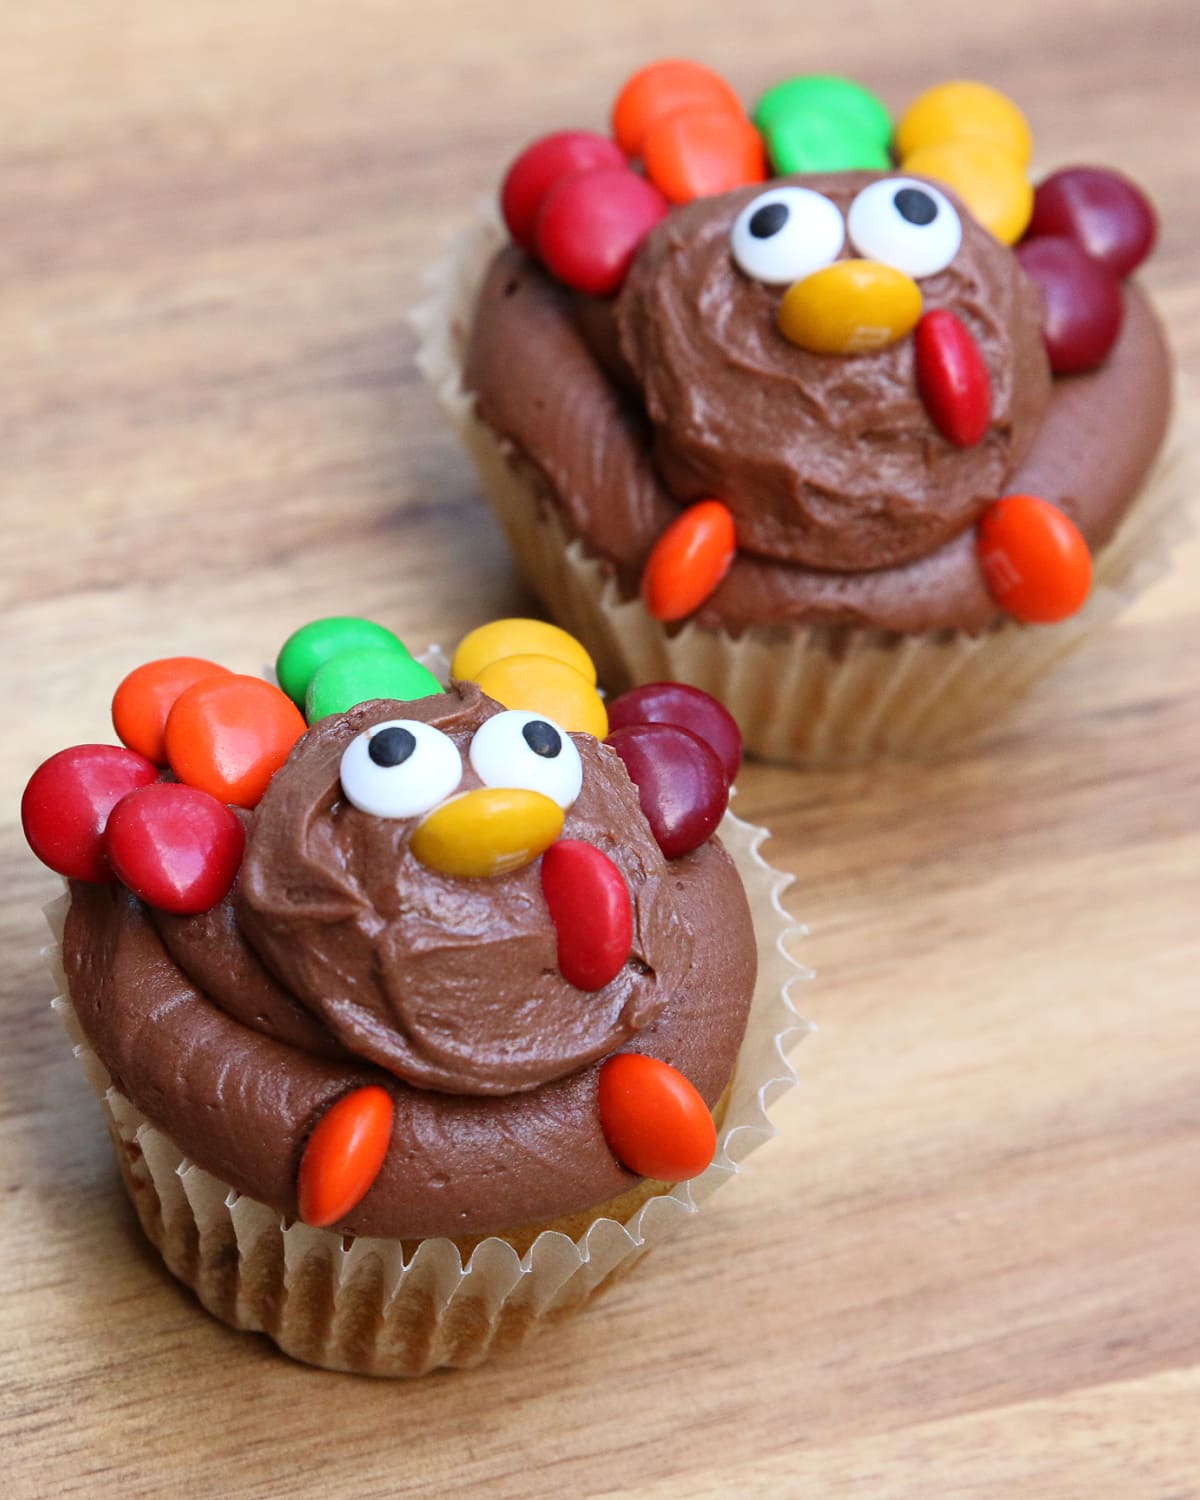 Turkey Cupcakes on a wooden table.